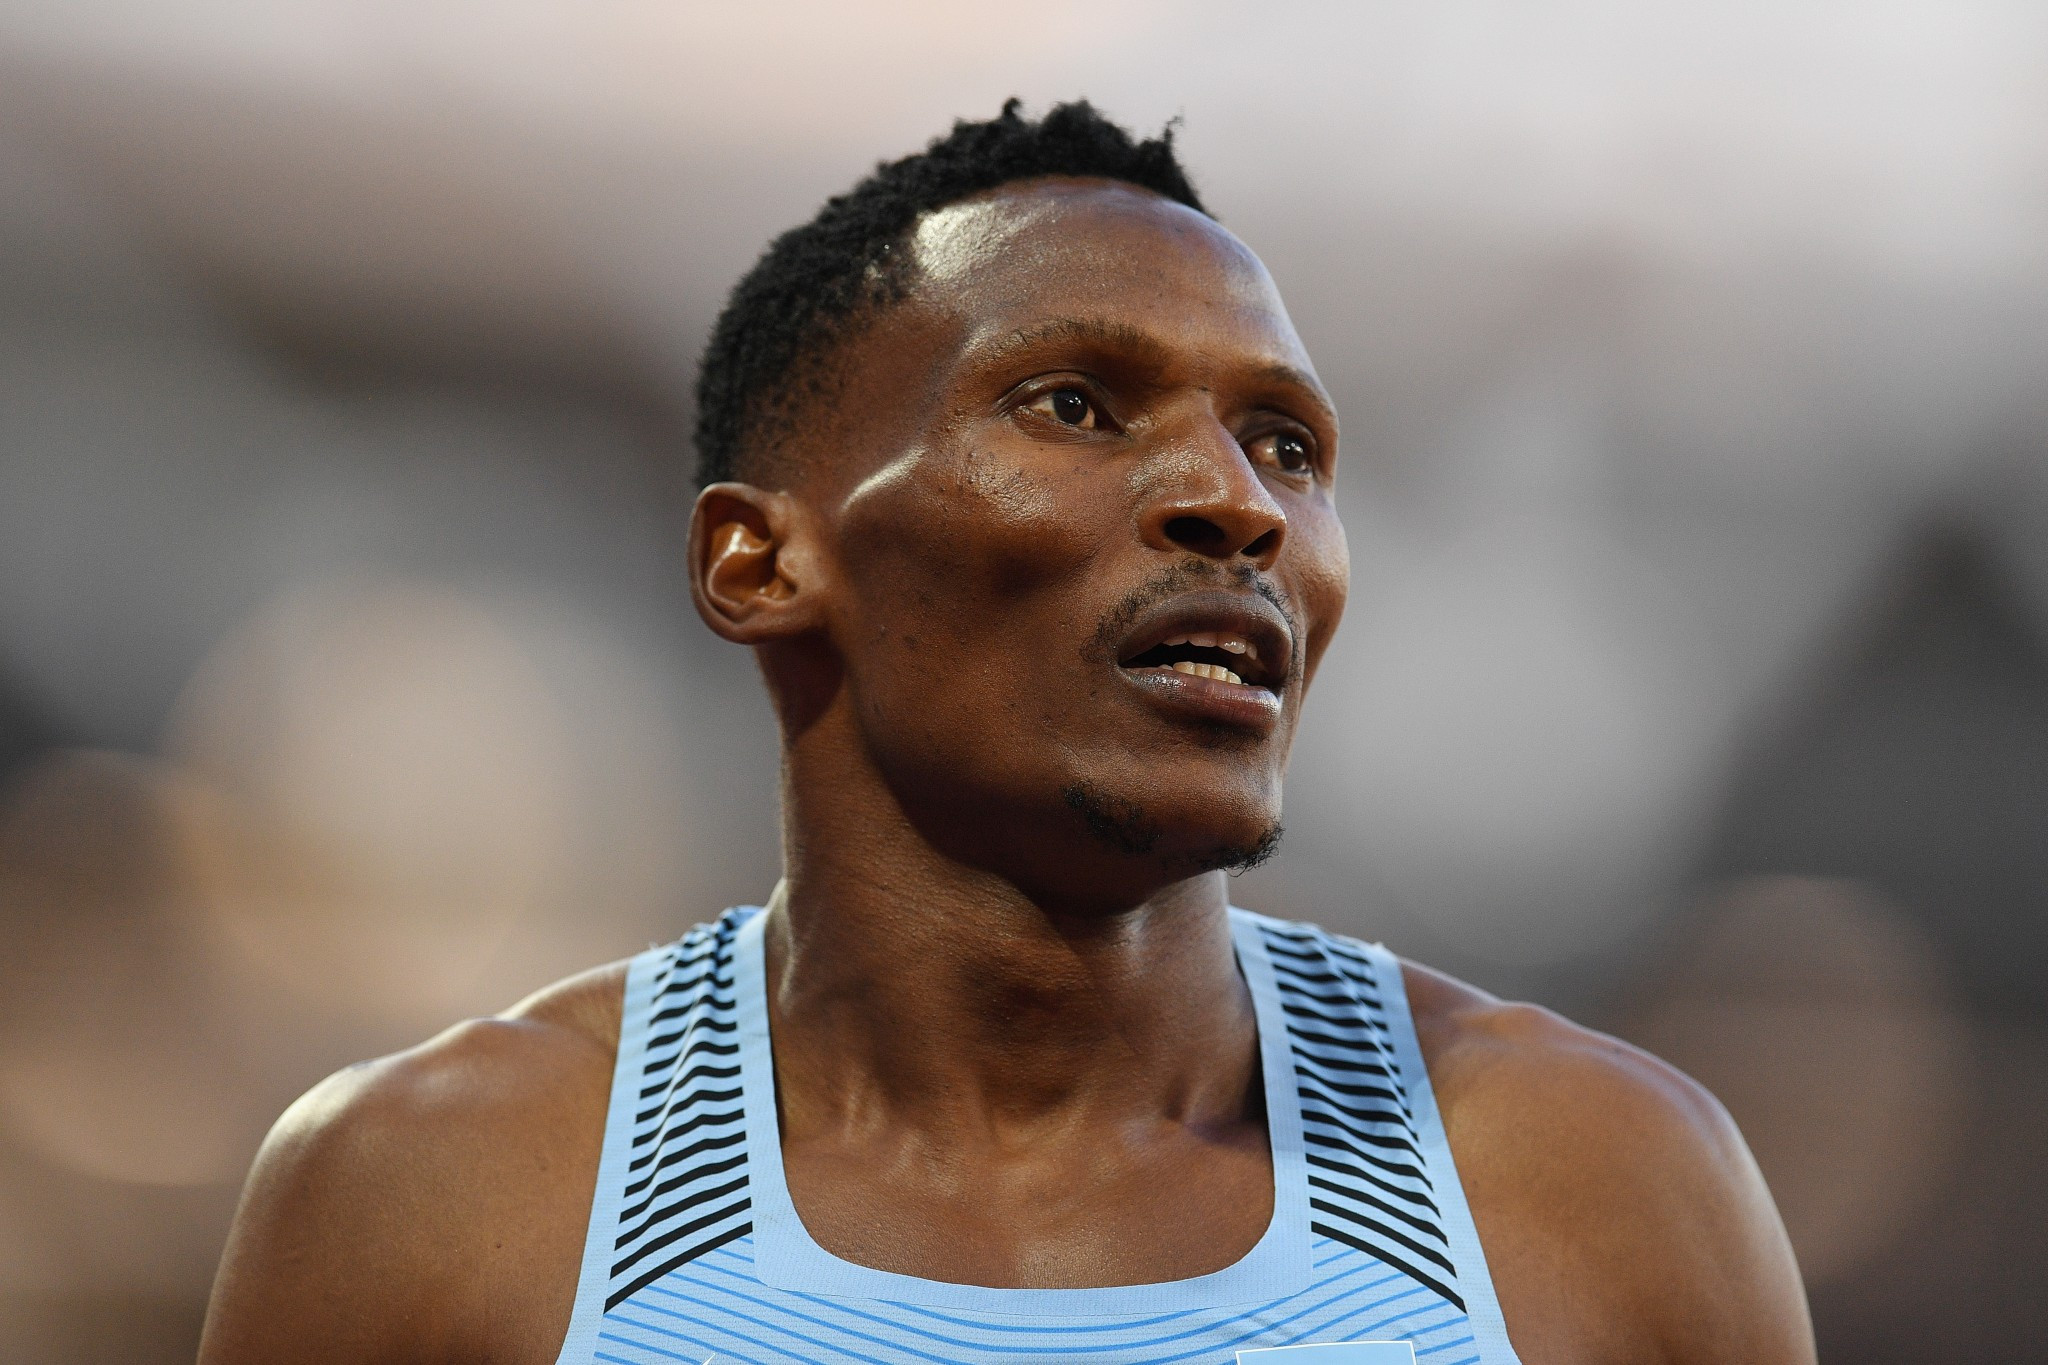 Gastroenteritis affects athletes competing at IAAF World Championships, officials confirm